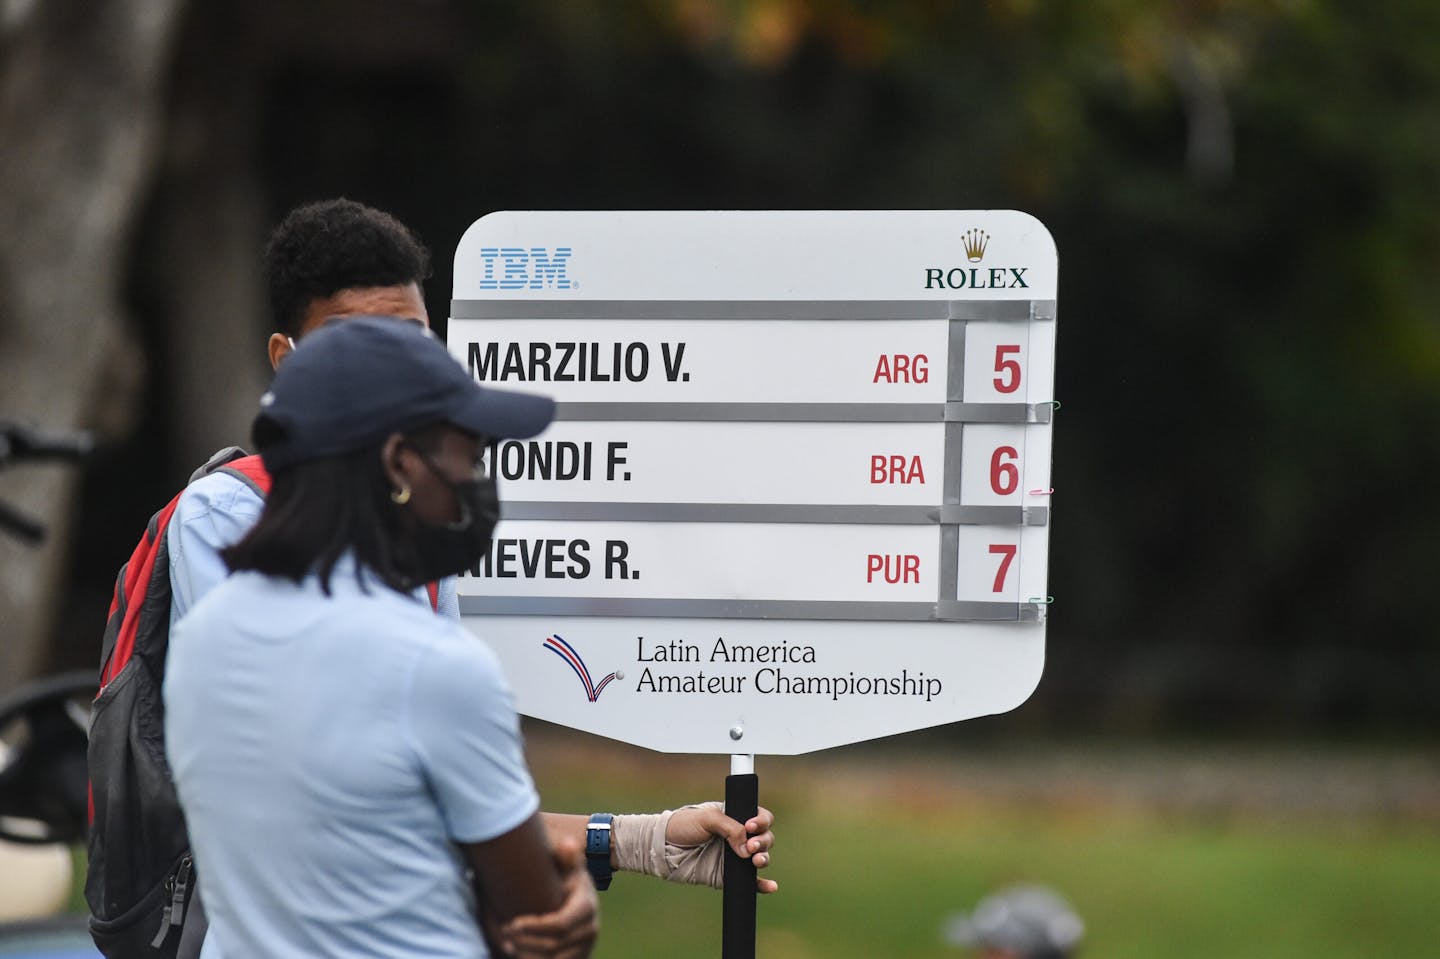 La Romana, DOMINICAN REPUBLIC: Carry Boards pictured at the 2022 Latin America Amateur Championship at Casa de Campo Resort during Final Round on January 23rd, 2022. 